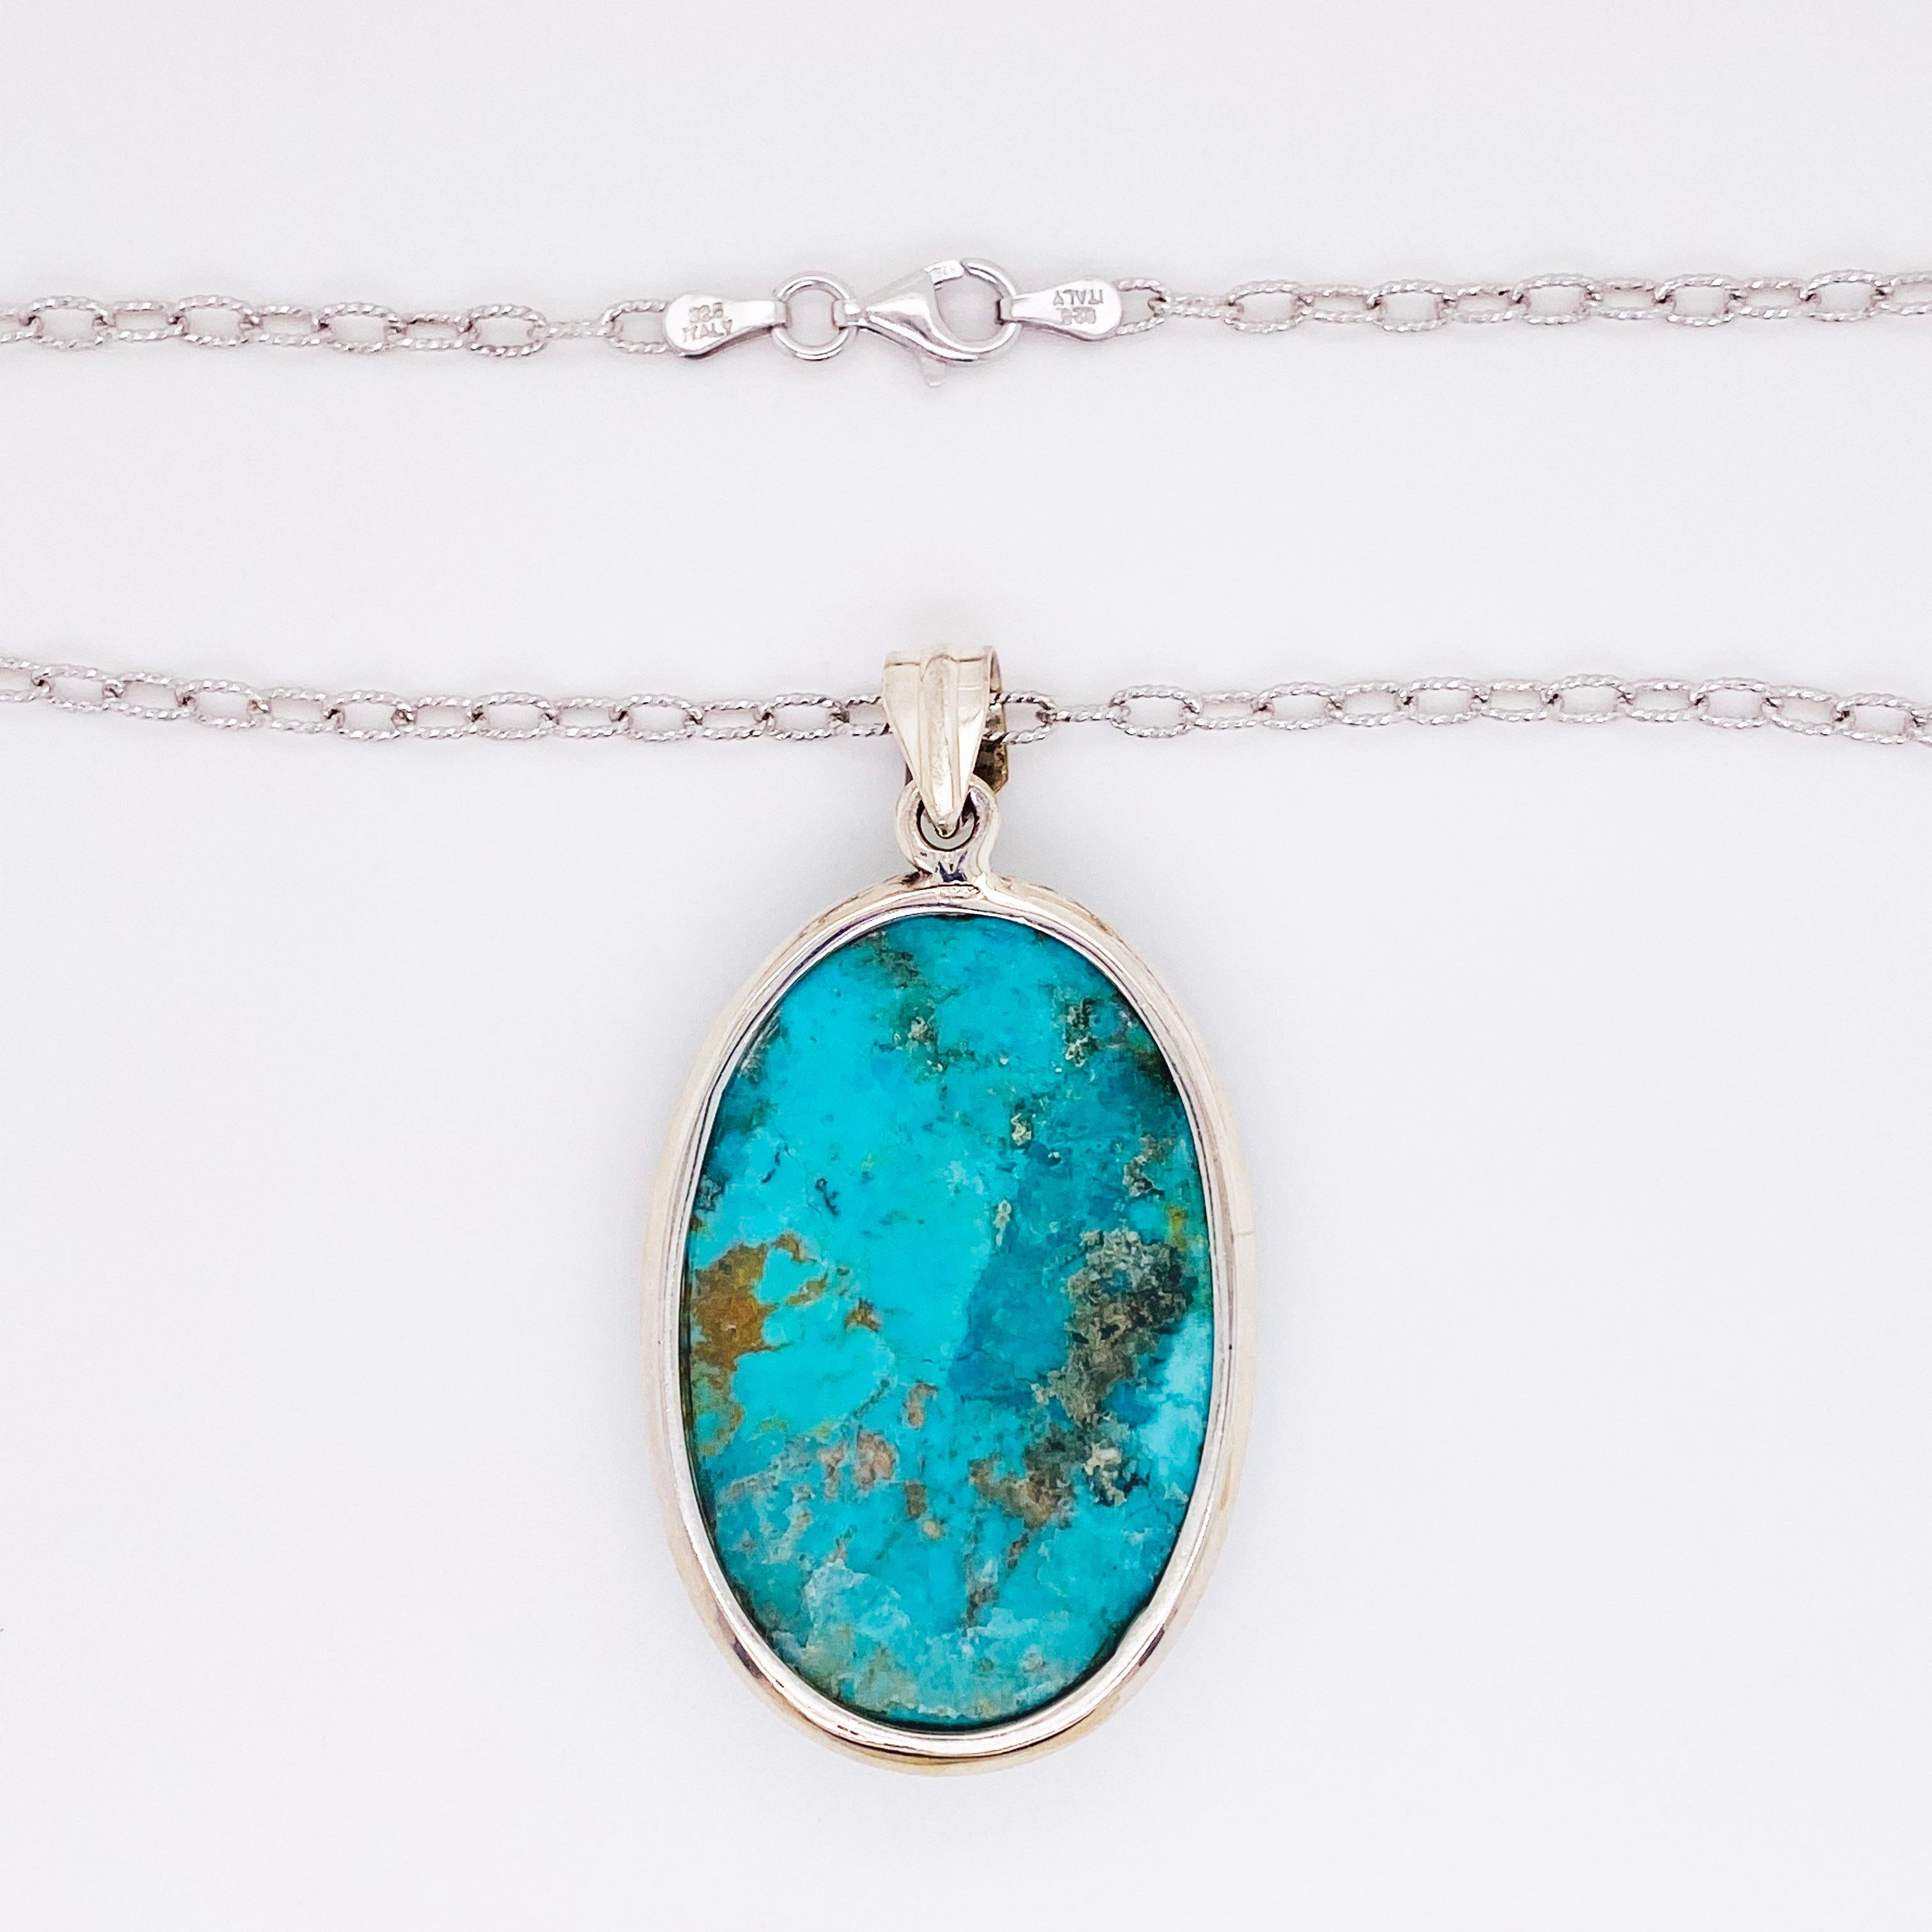 Oval Cut Organic Turquoise Pendant in Sterling Silver w Handmade Bezel w Oval Cable Chain